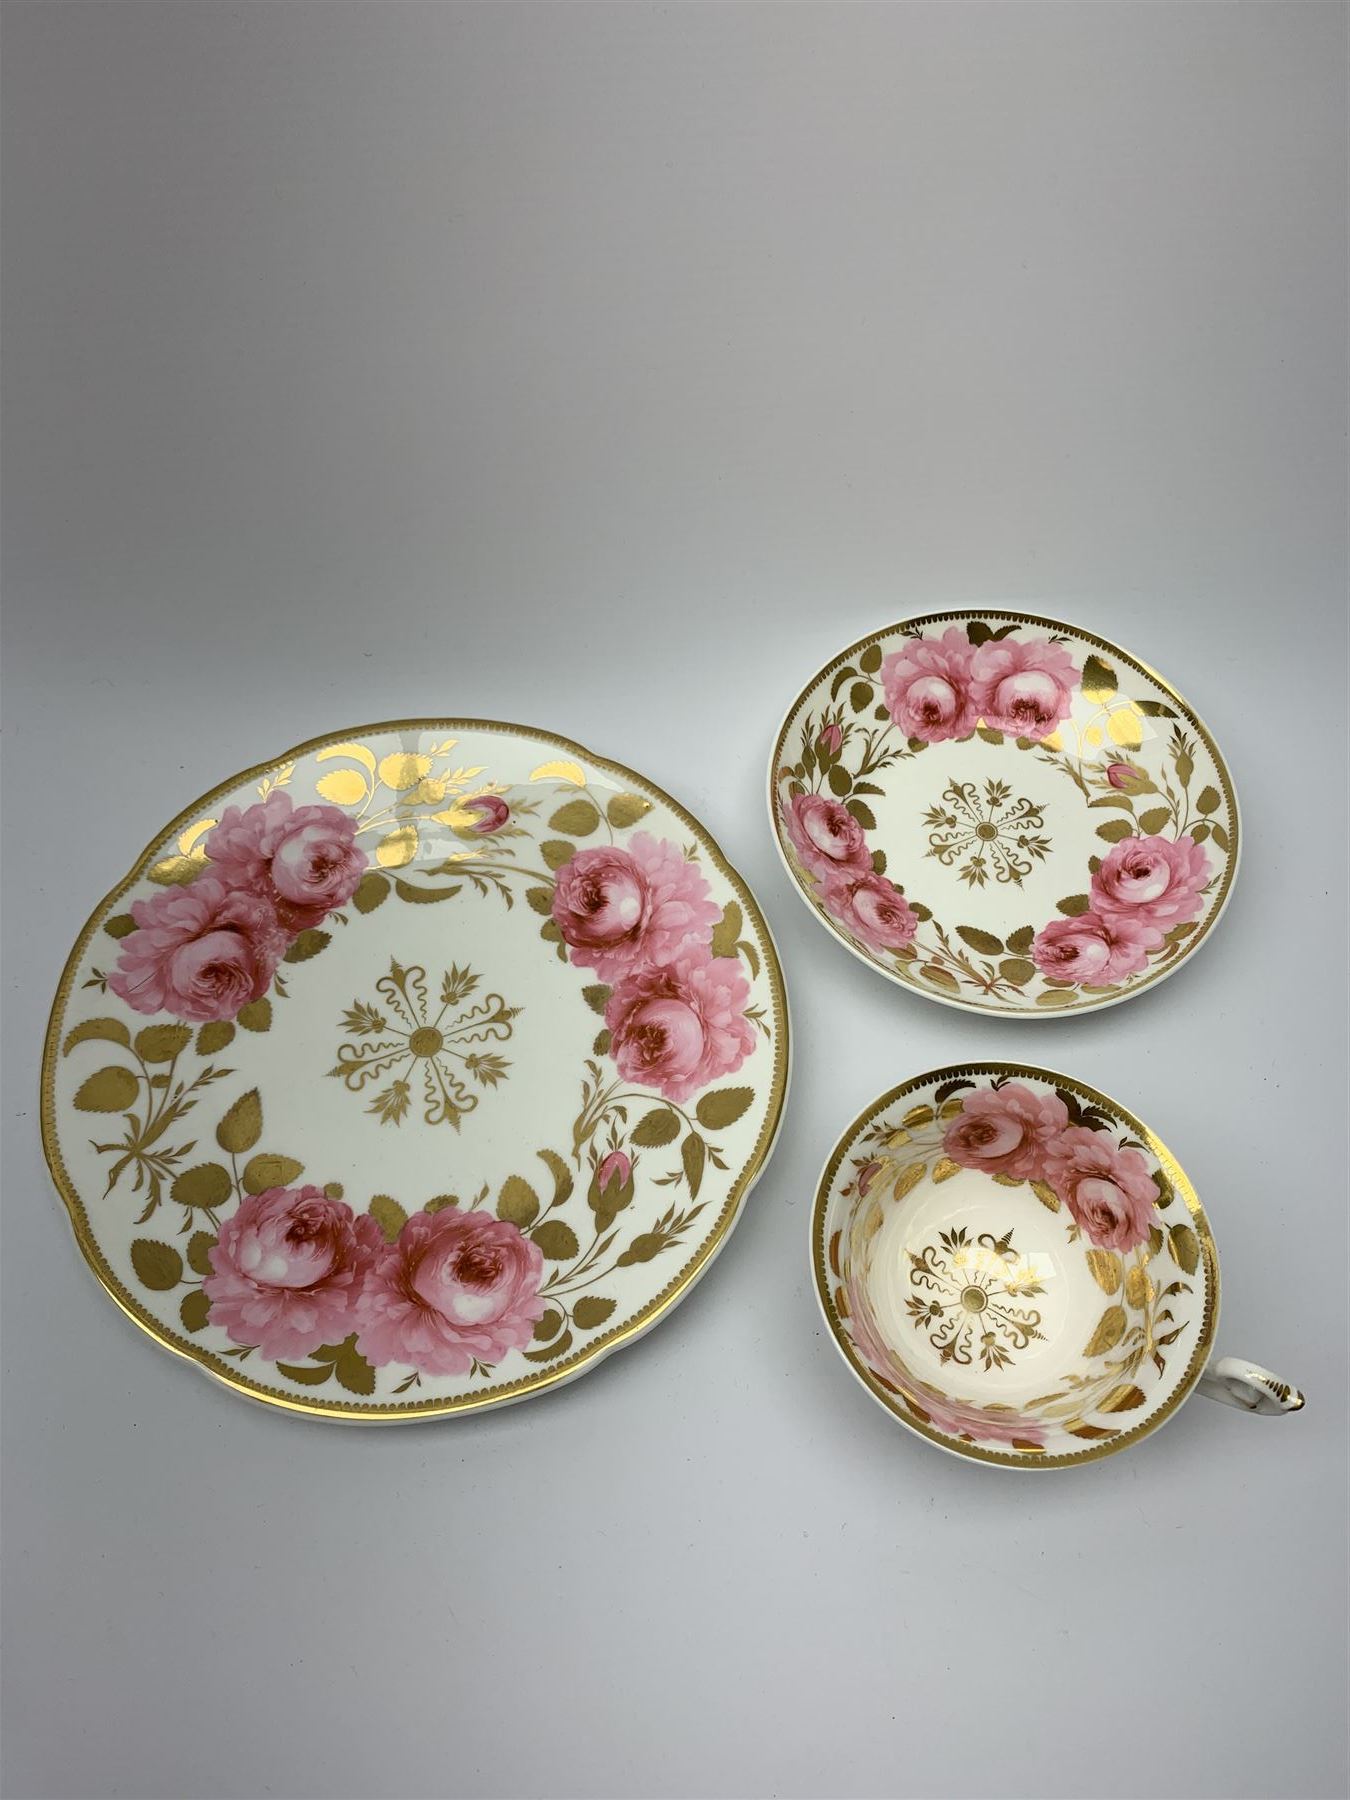 Early 19th century Daniel tea set for one - Image 2 of 9